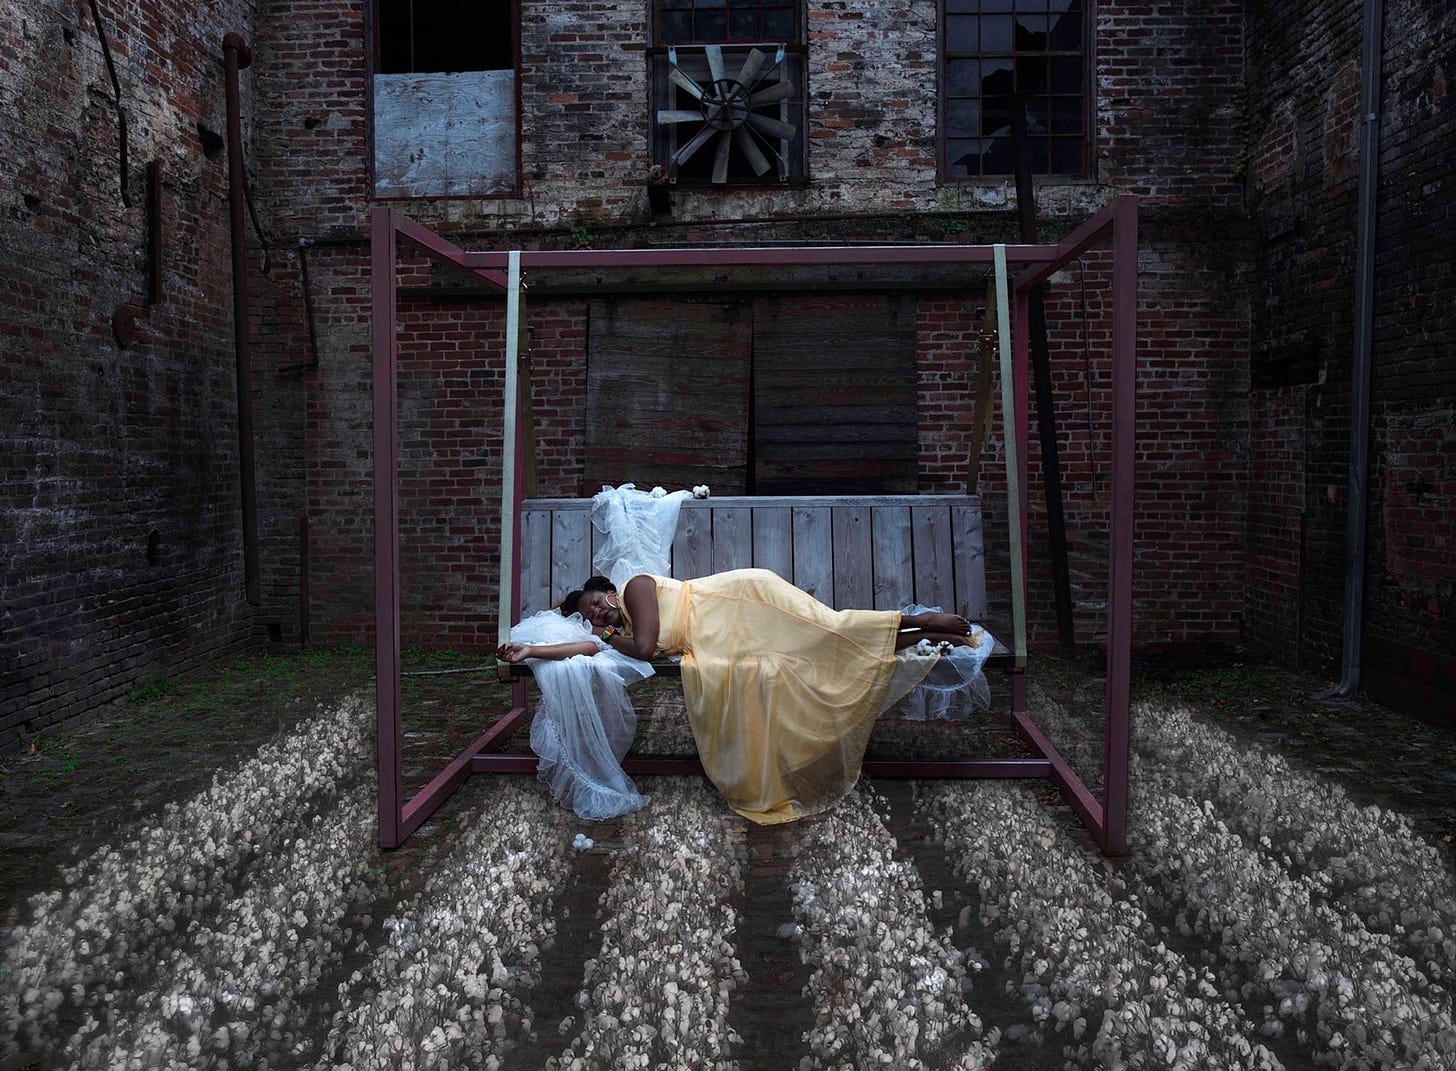 Photo of Tricia Hersey in a yellow gown napping on a bench in an urban landscape over rows of cotton; Credit: Charlie Watts.